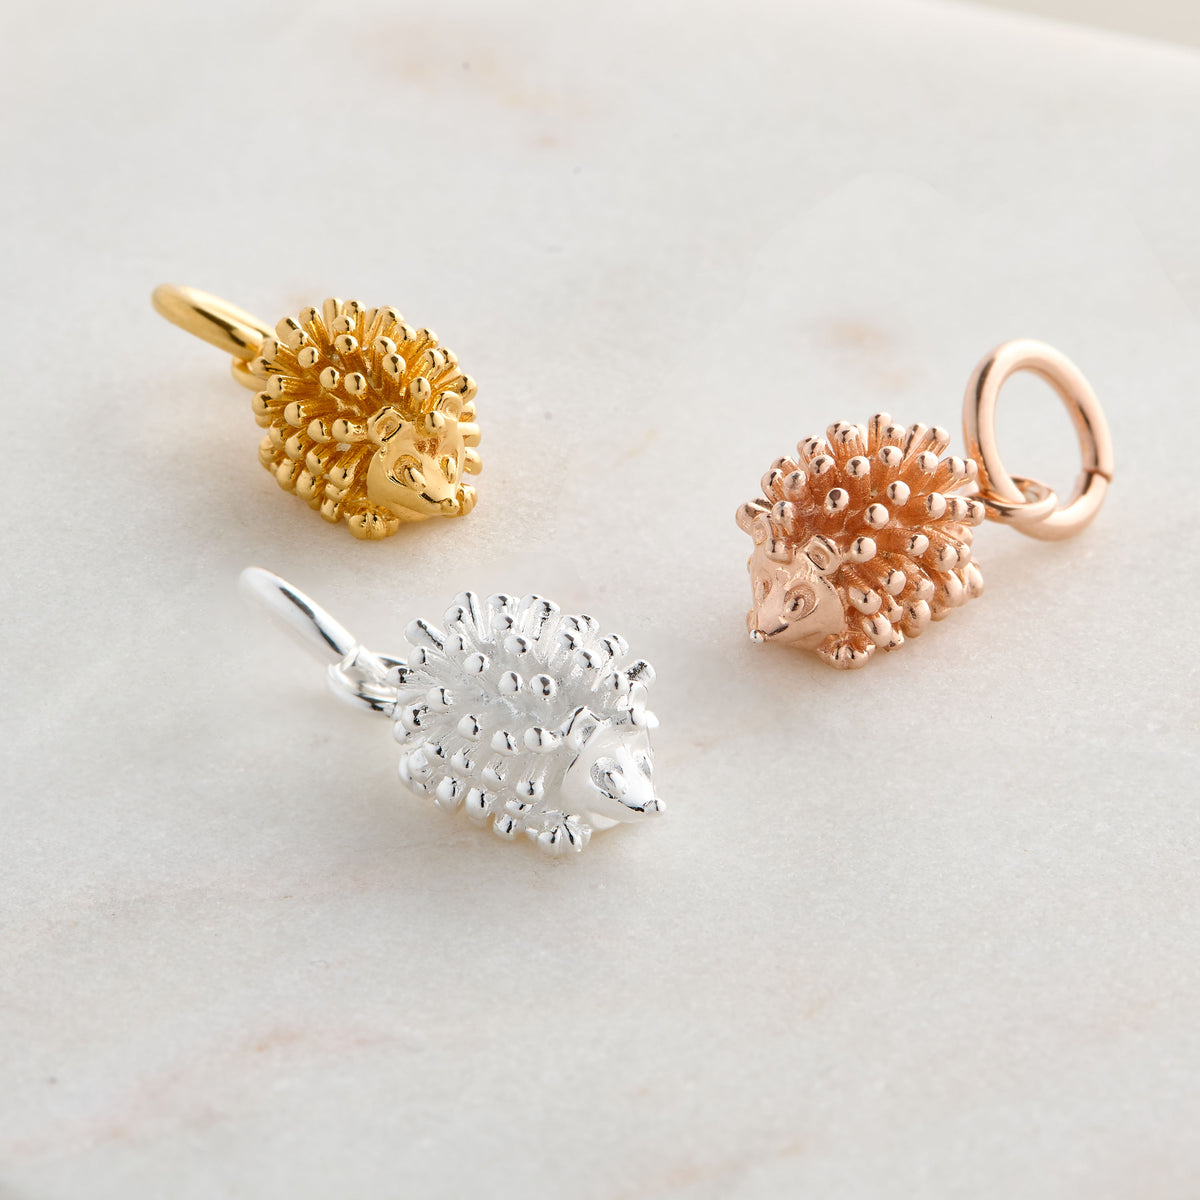 silver or gold plated hedgehog charms